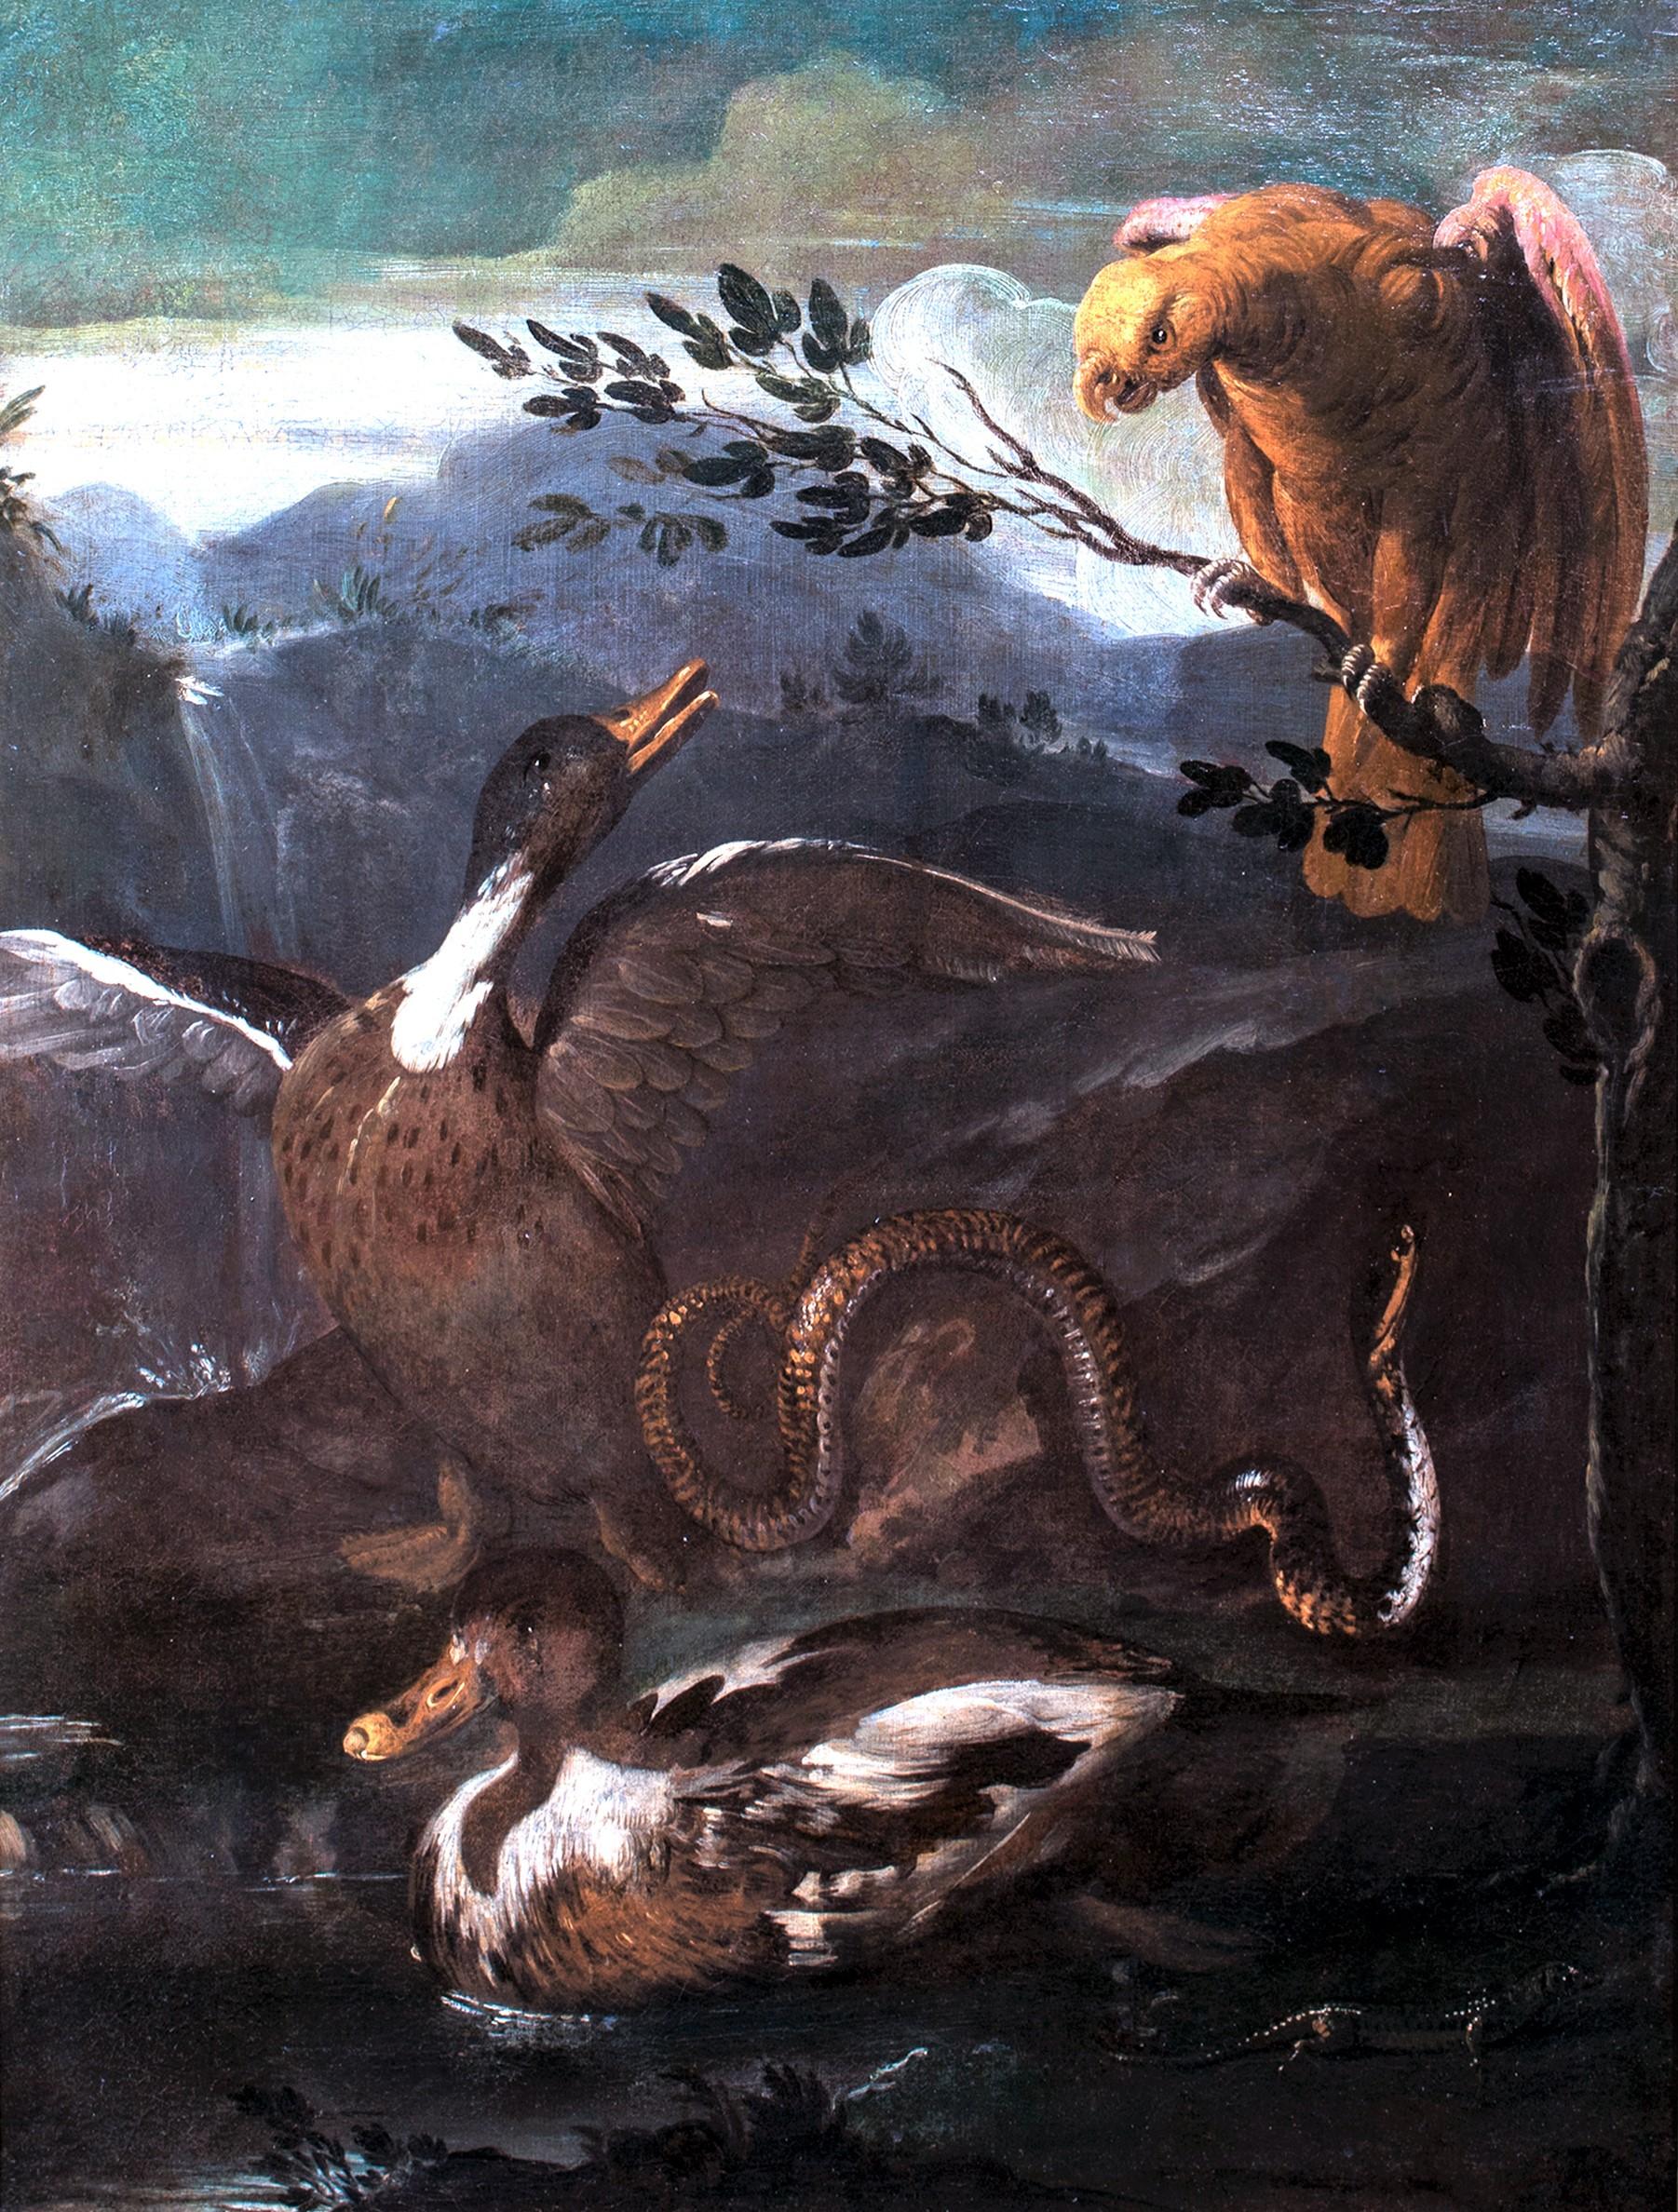 Unknown Animal Painting - Parrot, Snake, Lizard and Ducks, 17th Century  Genoese School